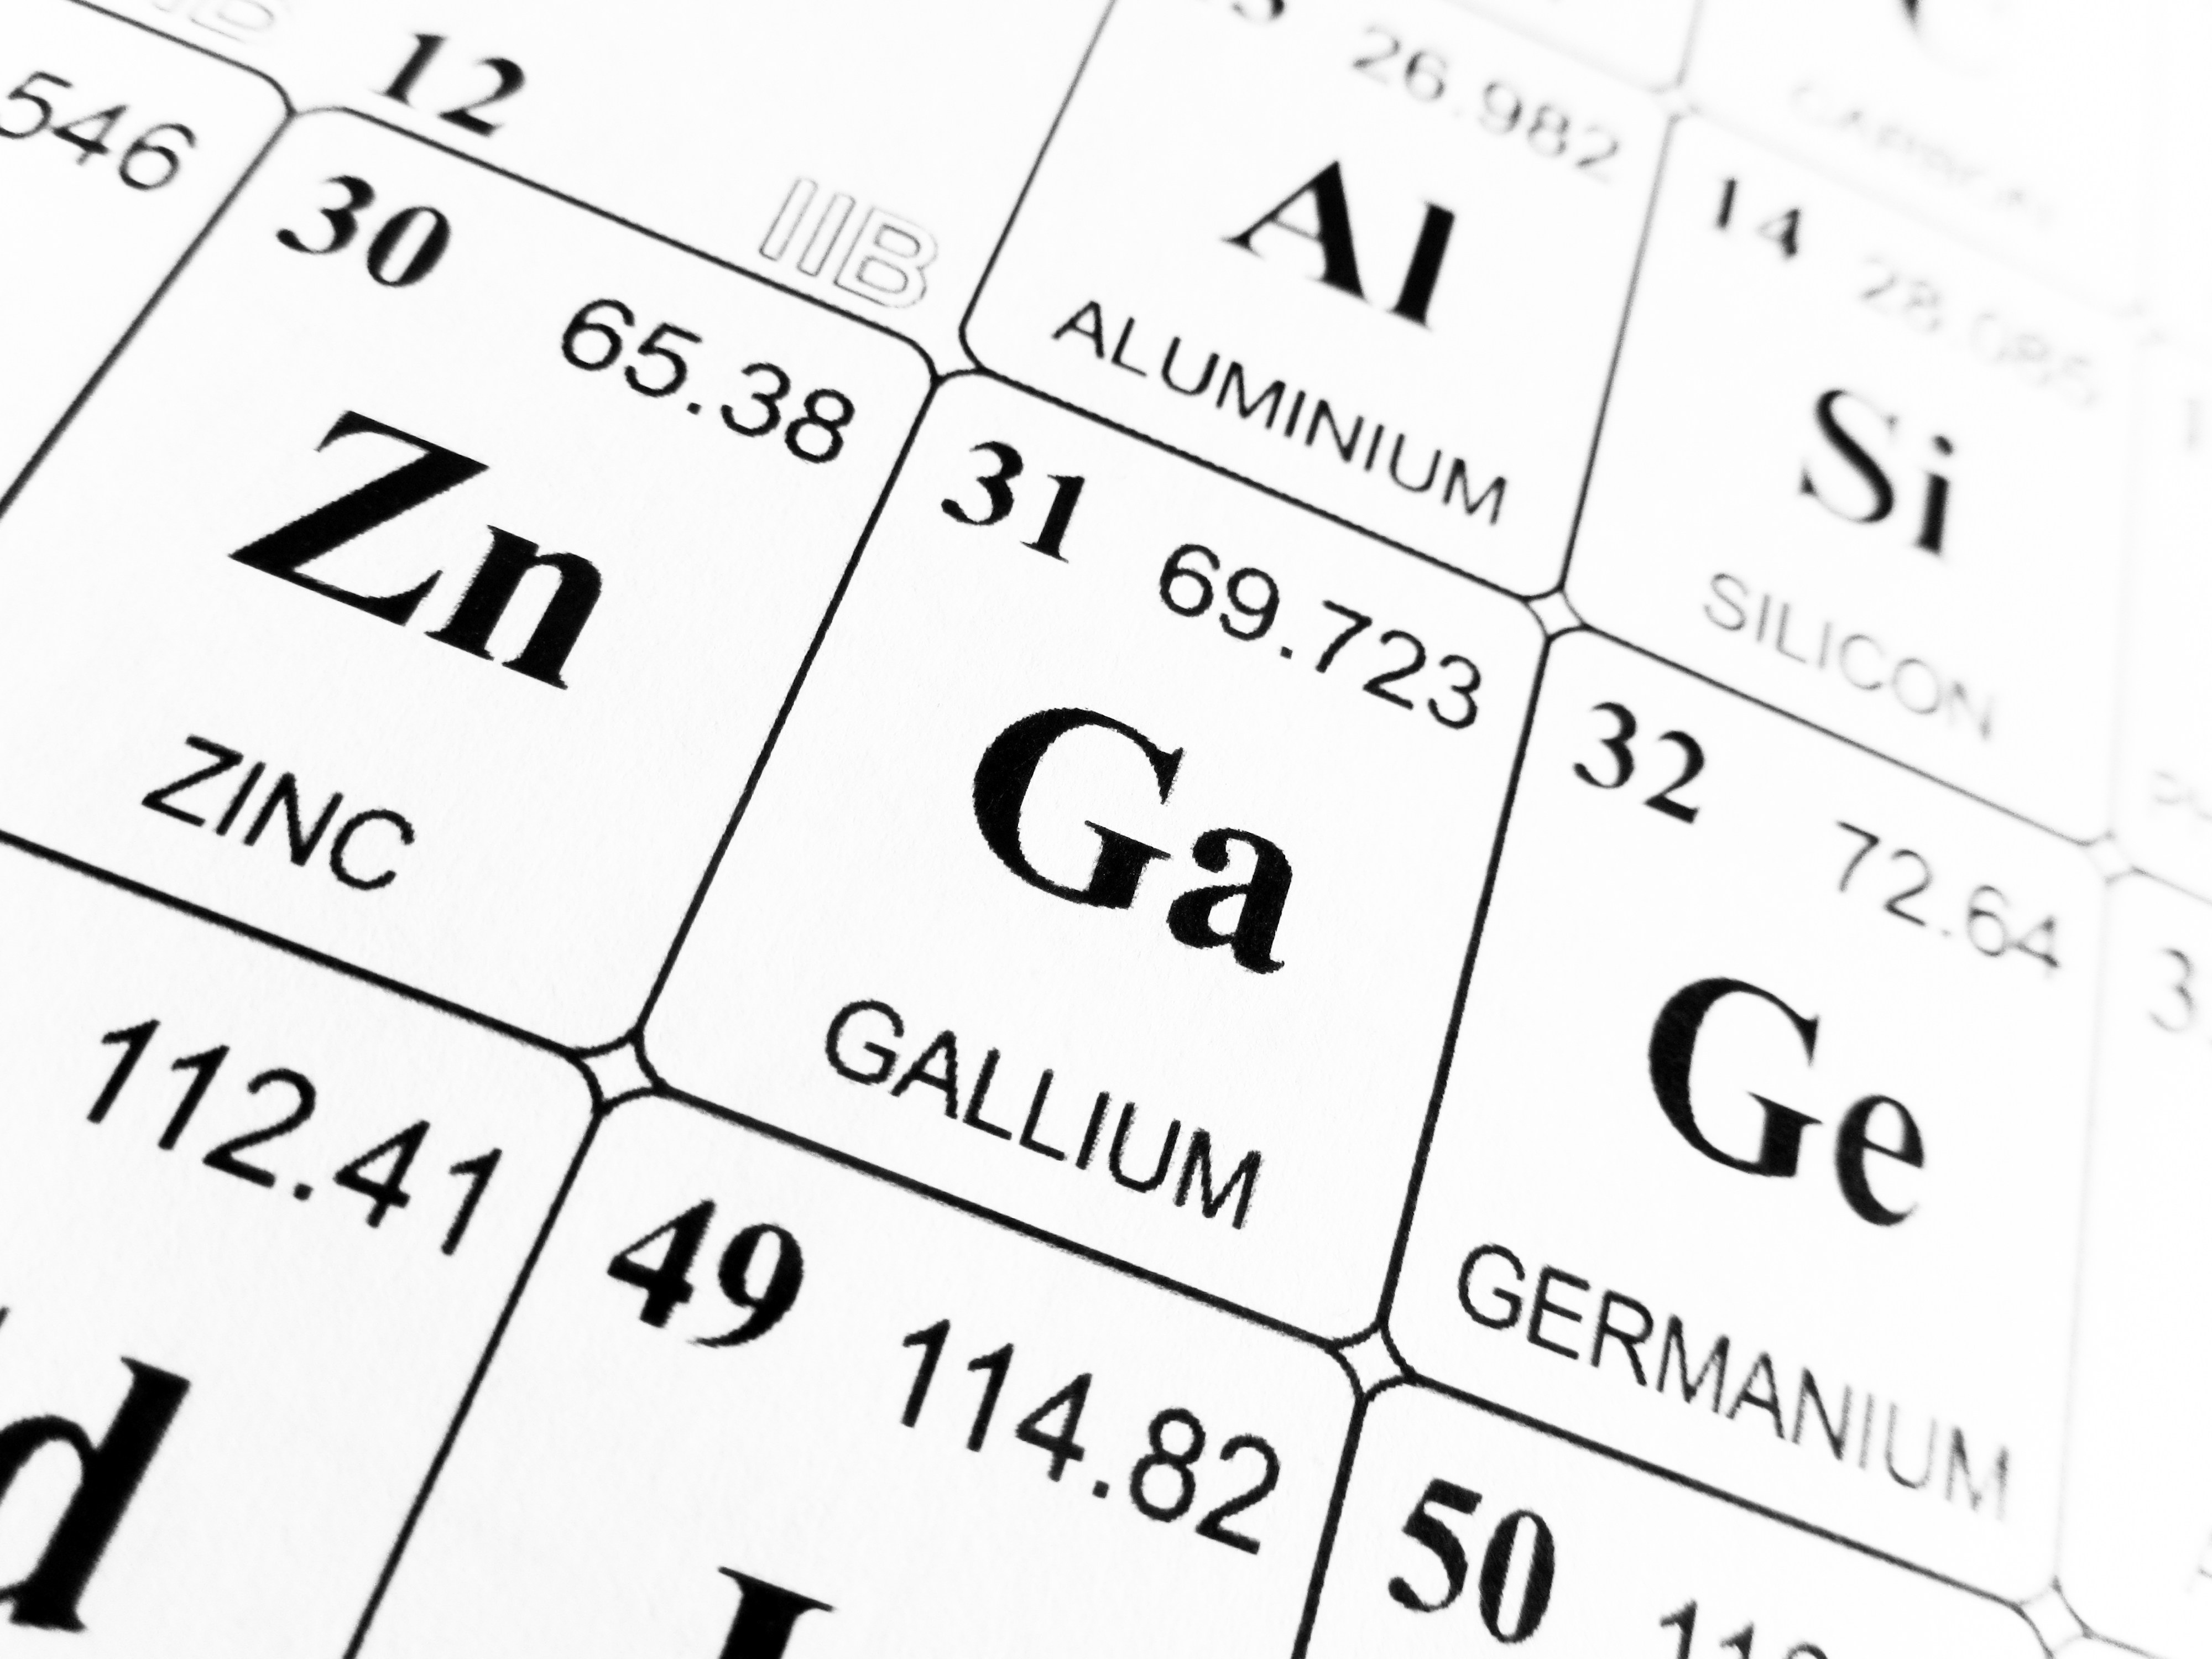 Gallium and germanium are considered technology-critical elements. Photo: Shutterstock